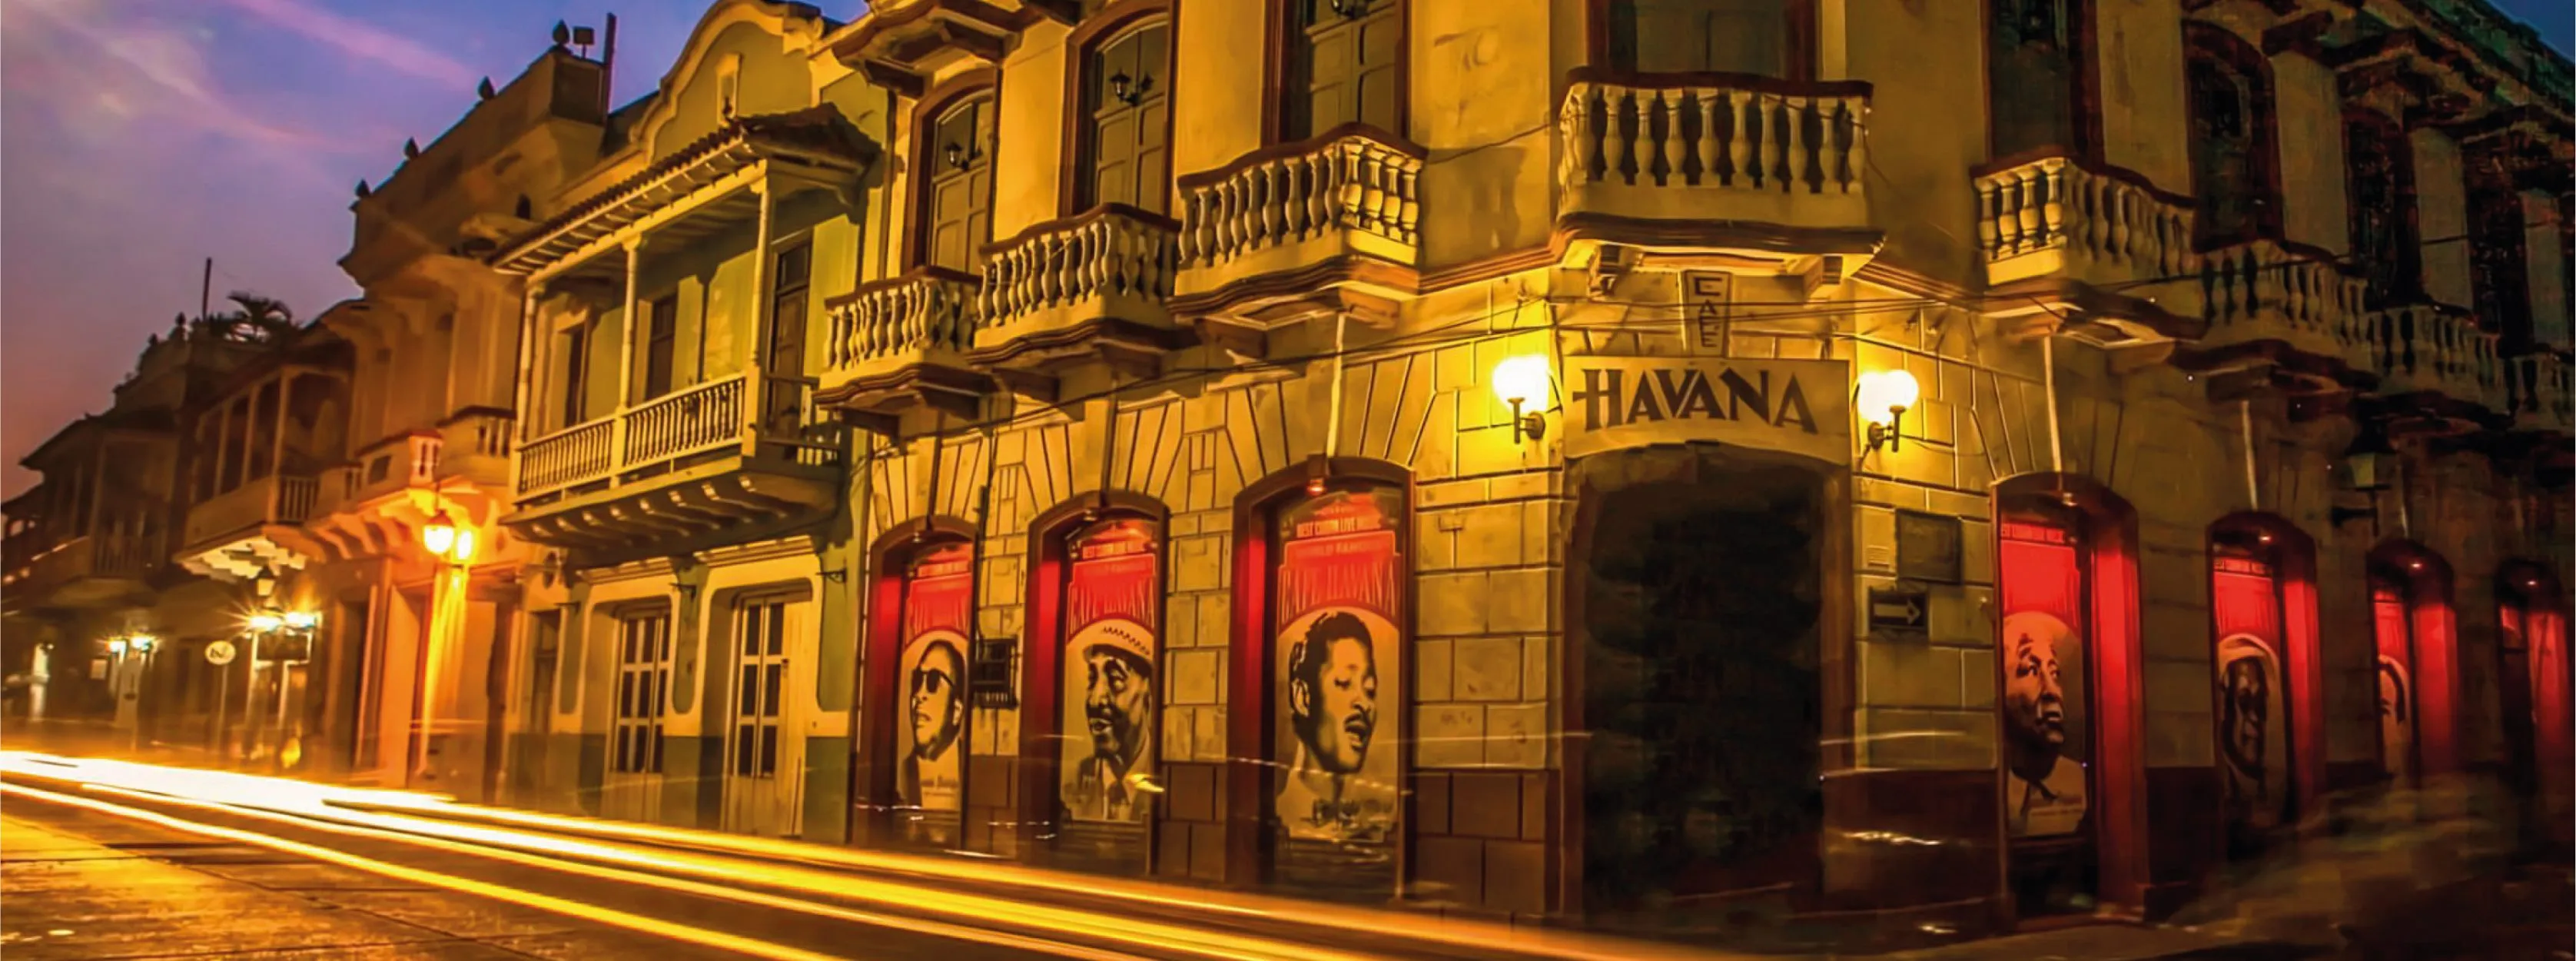 Cafe Havana in Colombia, South America | Nightclubs,Live Music Venues,Bars - Rated 4.4